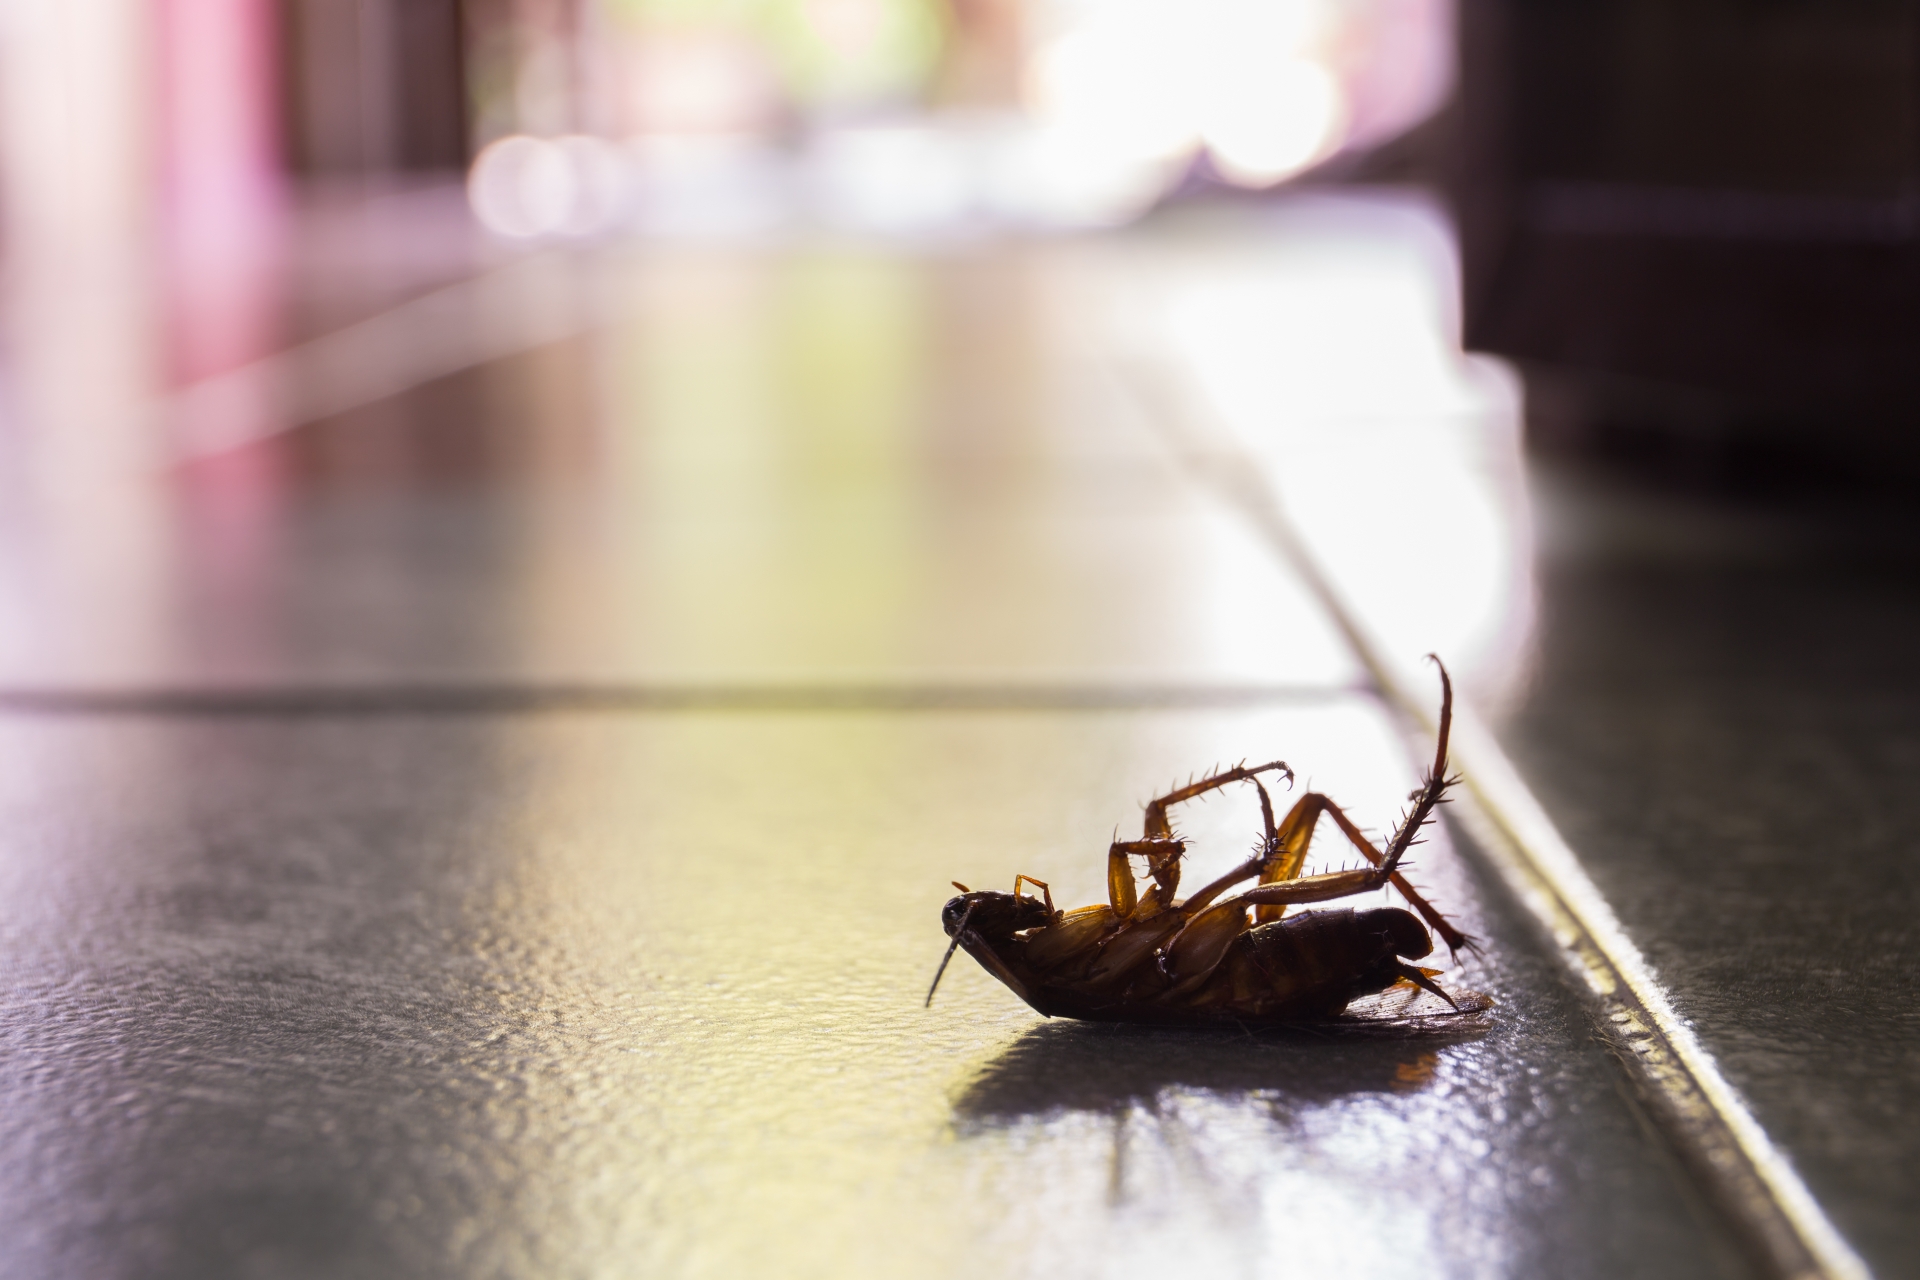 Cockroach Control, Pest Control in Hounslow, Lampton, TW3. Call Now 020 8166 9746